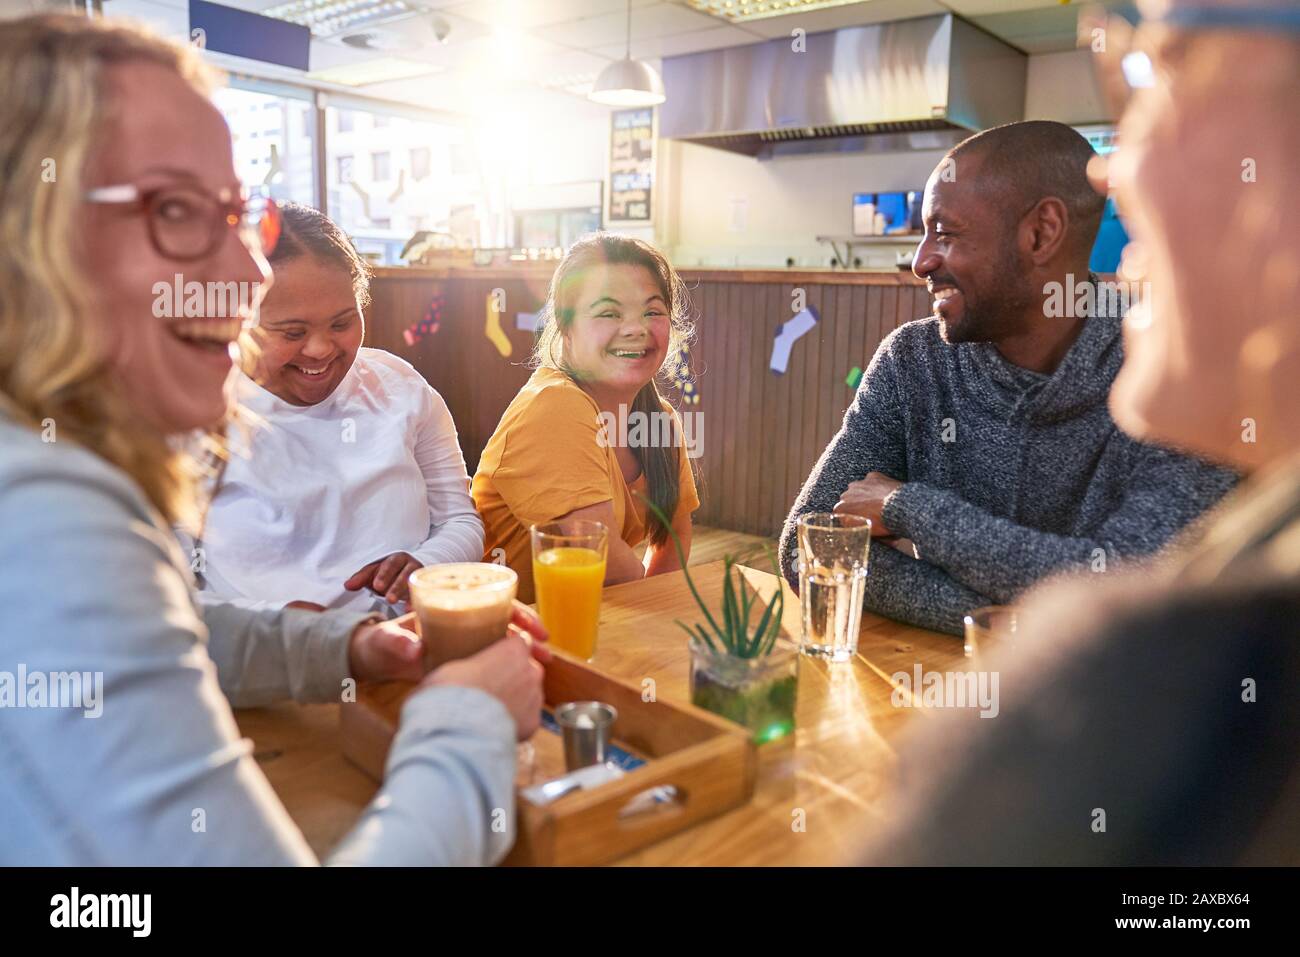 Young women with Down Syndrome laughing with friends in cafe Stock Photo